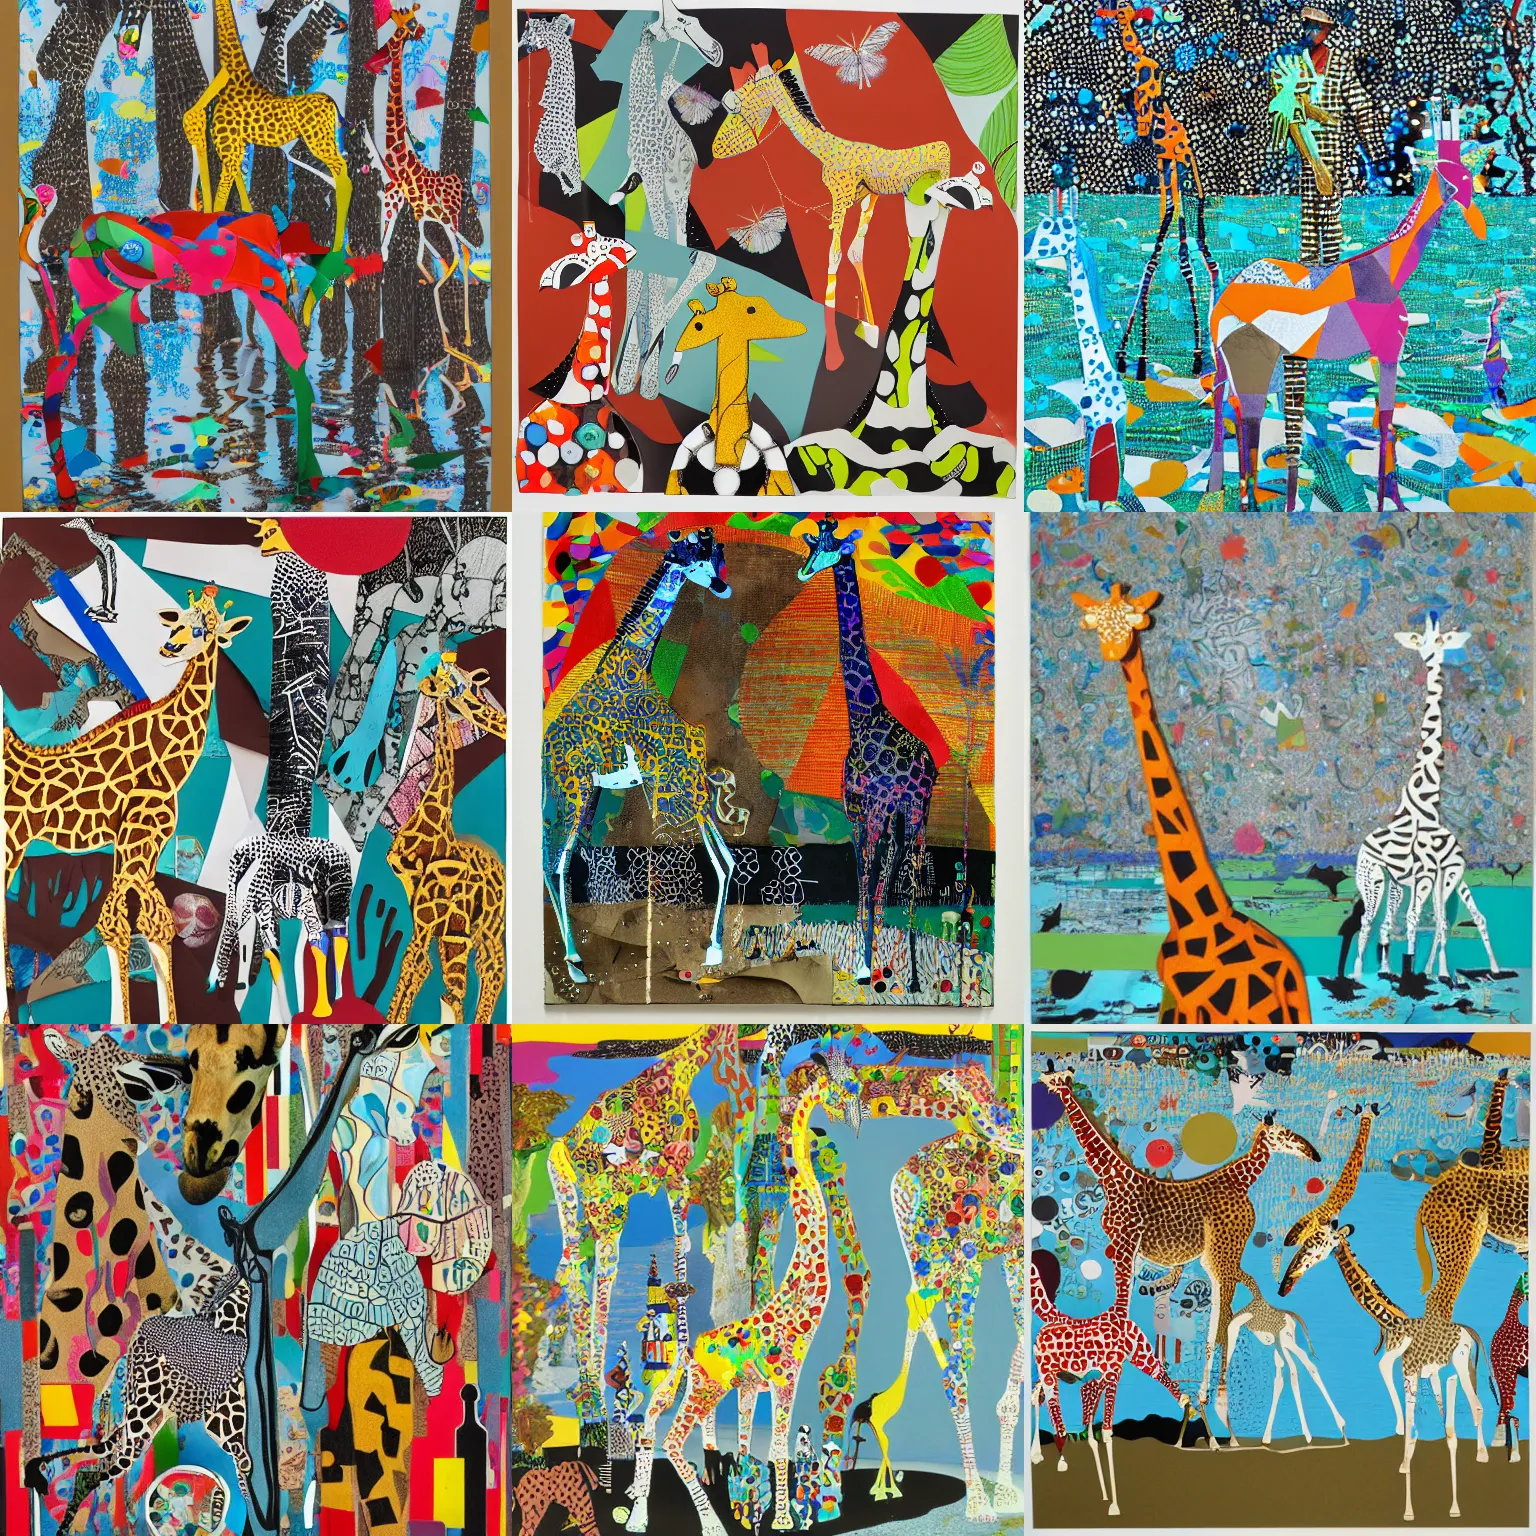 Prompt: Giraffes crossing a river, collage, found objects, cut colored paper, stencils, ink, oil painting, by Damien Hirst, Chris Ofili, Tracey Emin